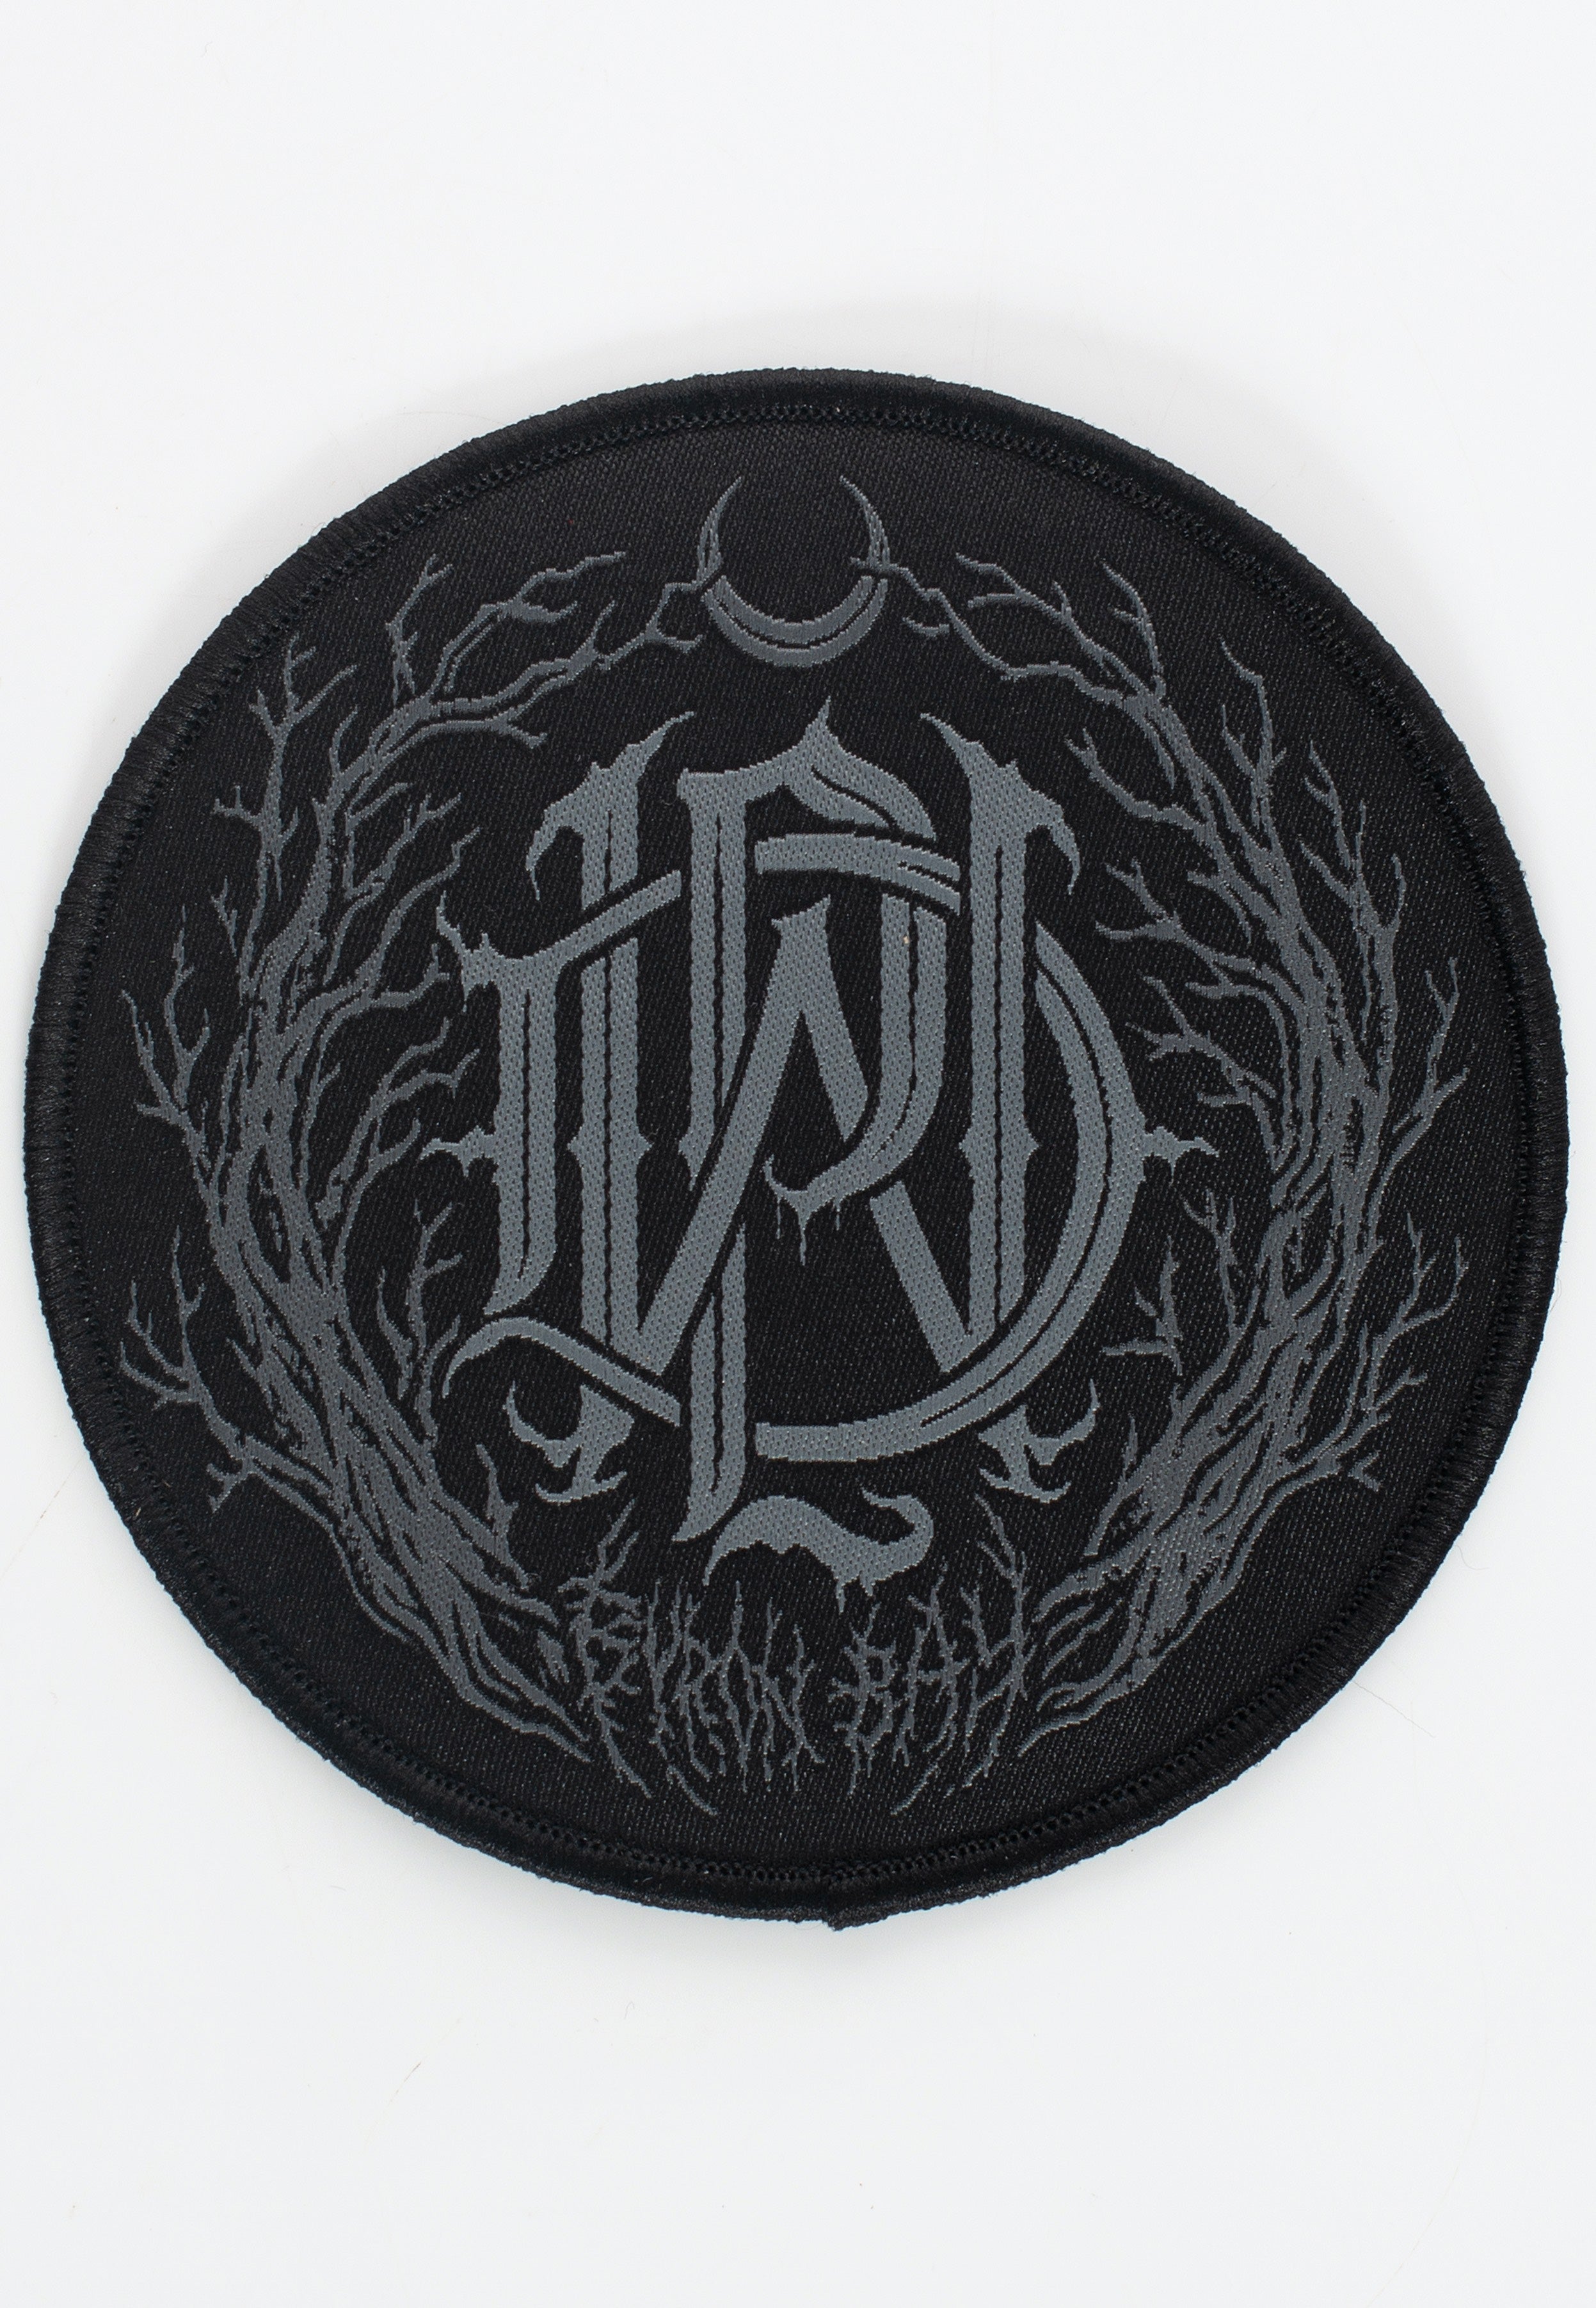 Parkway Drive - Metal Crest - Patch